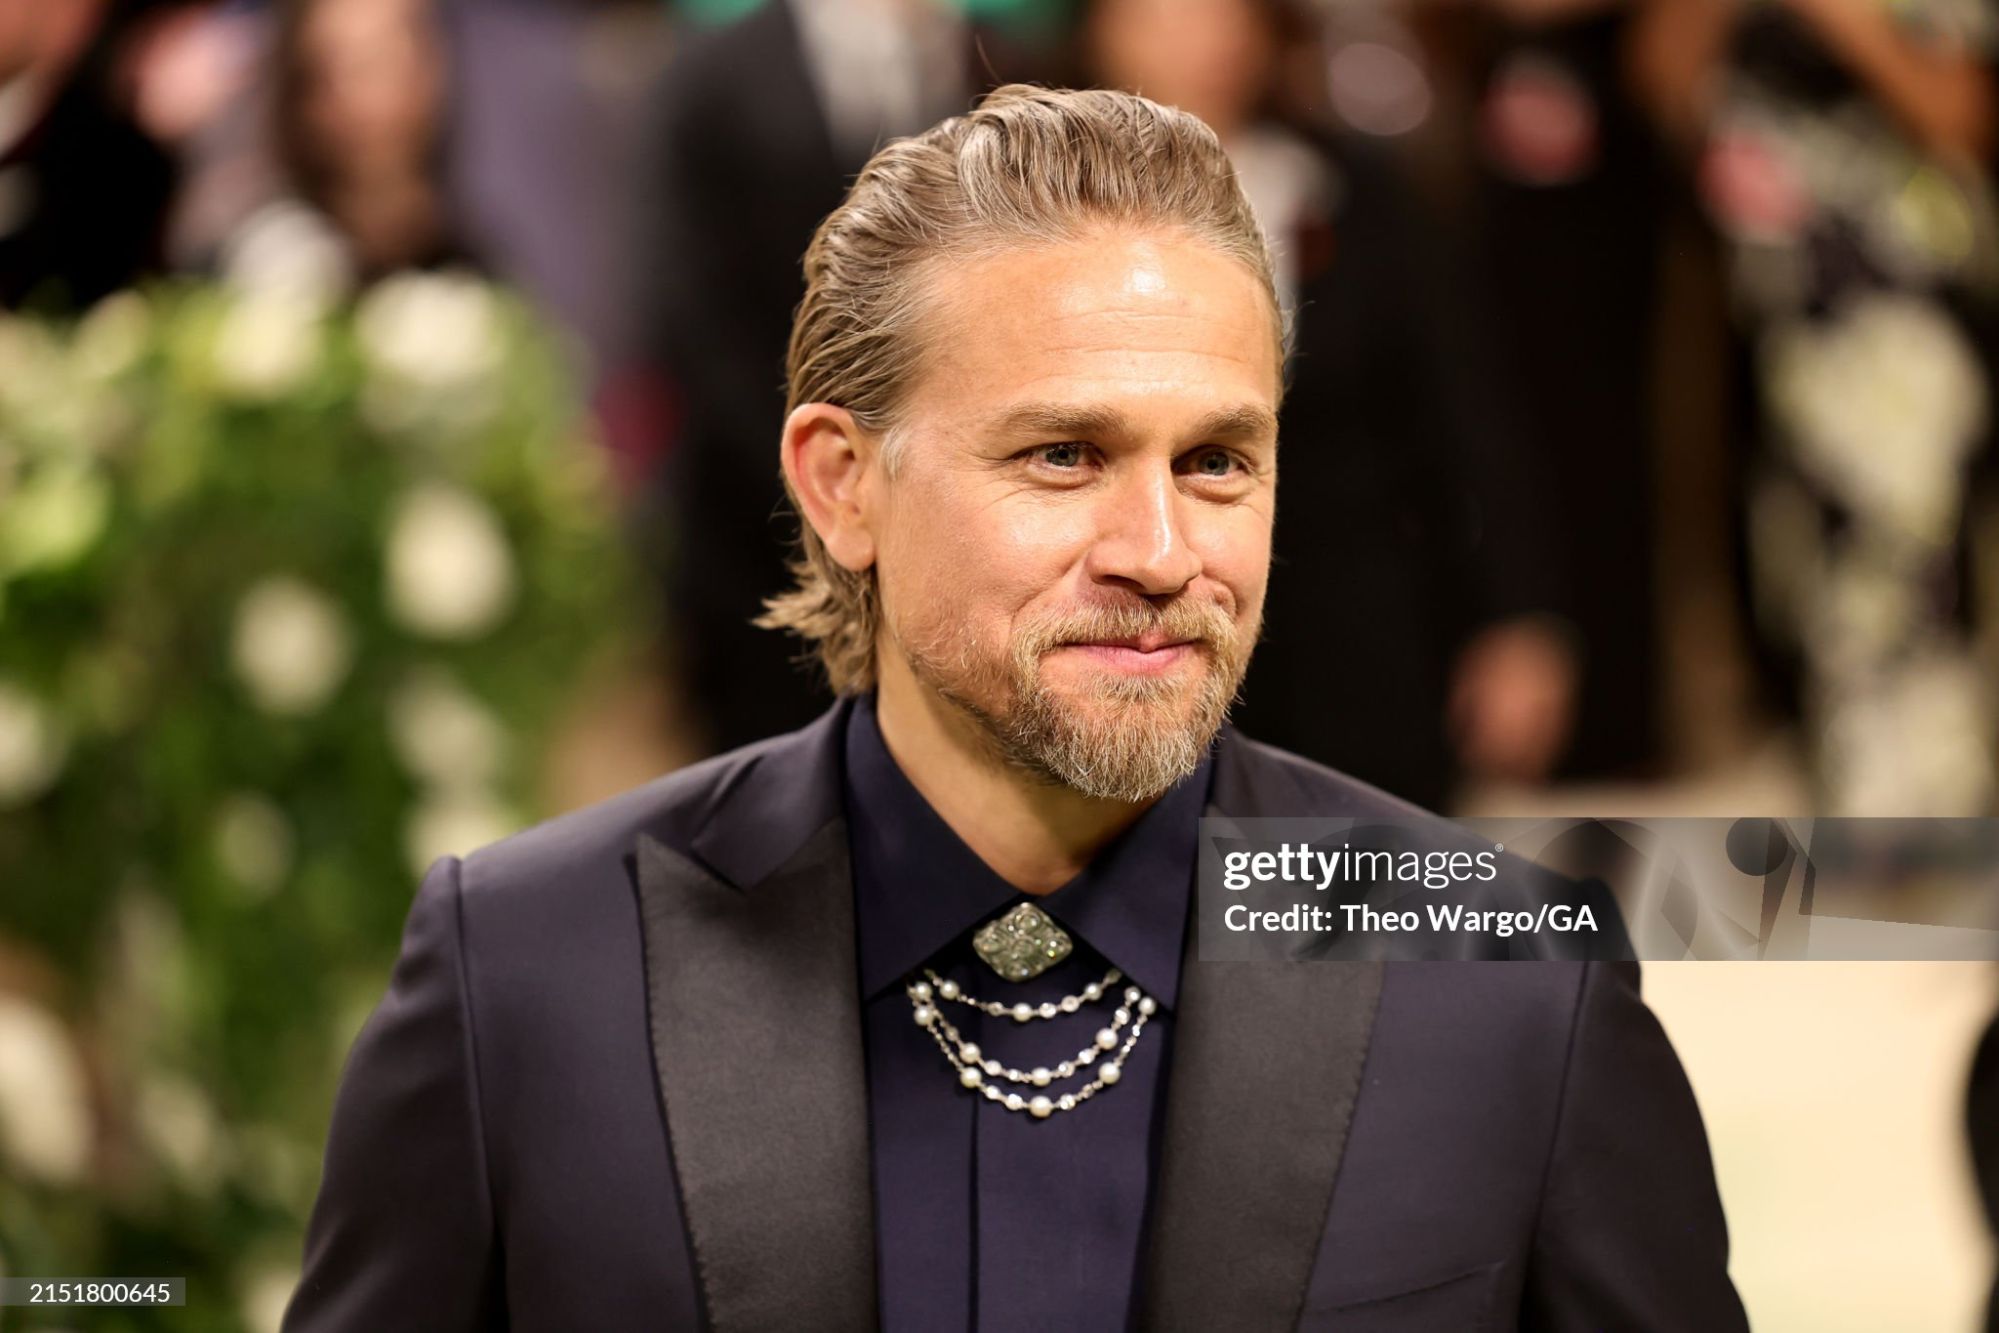 gettyimages-2151800645-2048x2048.jpg